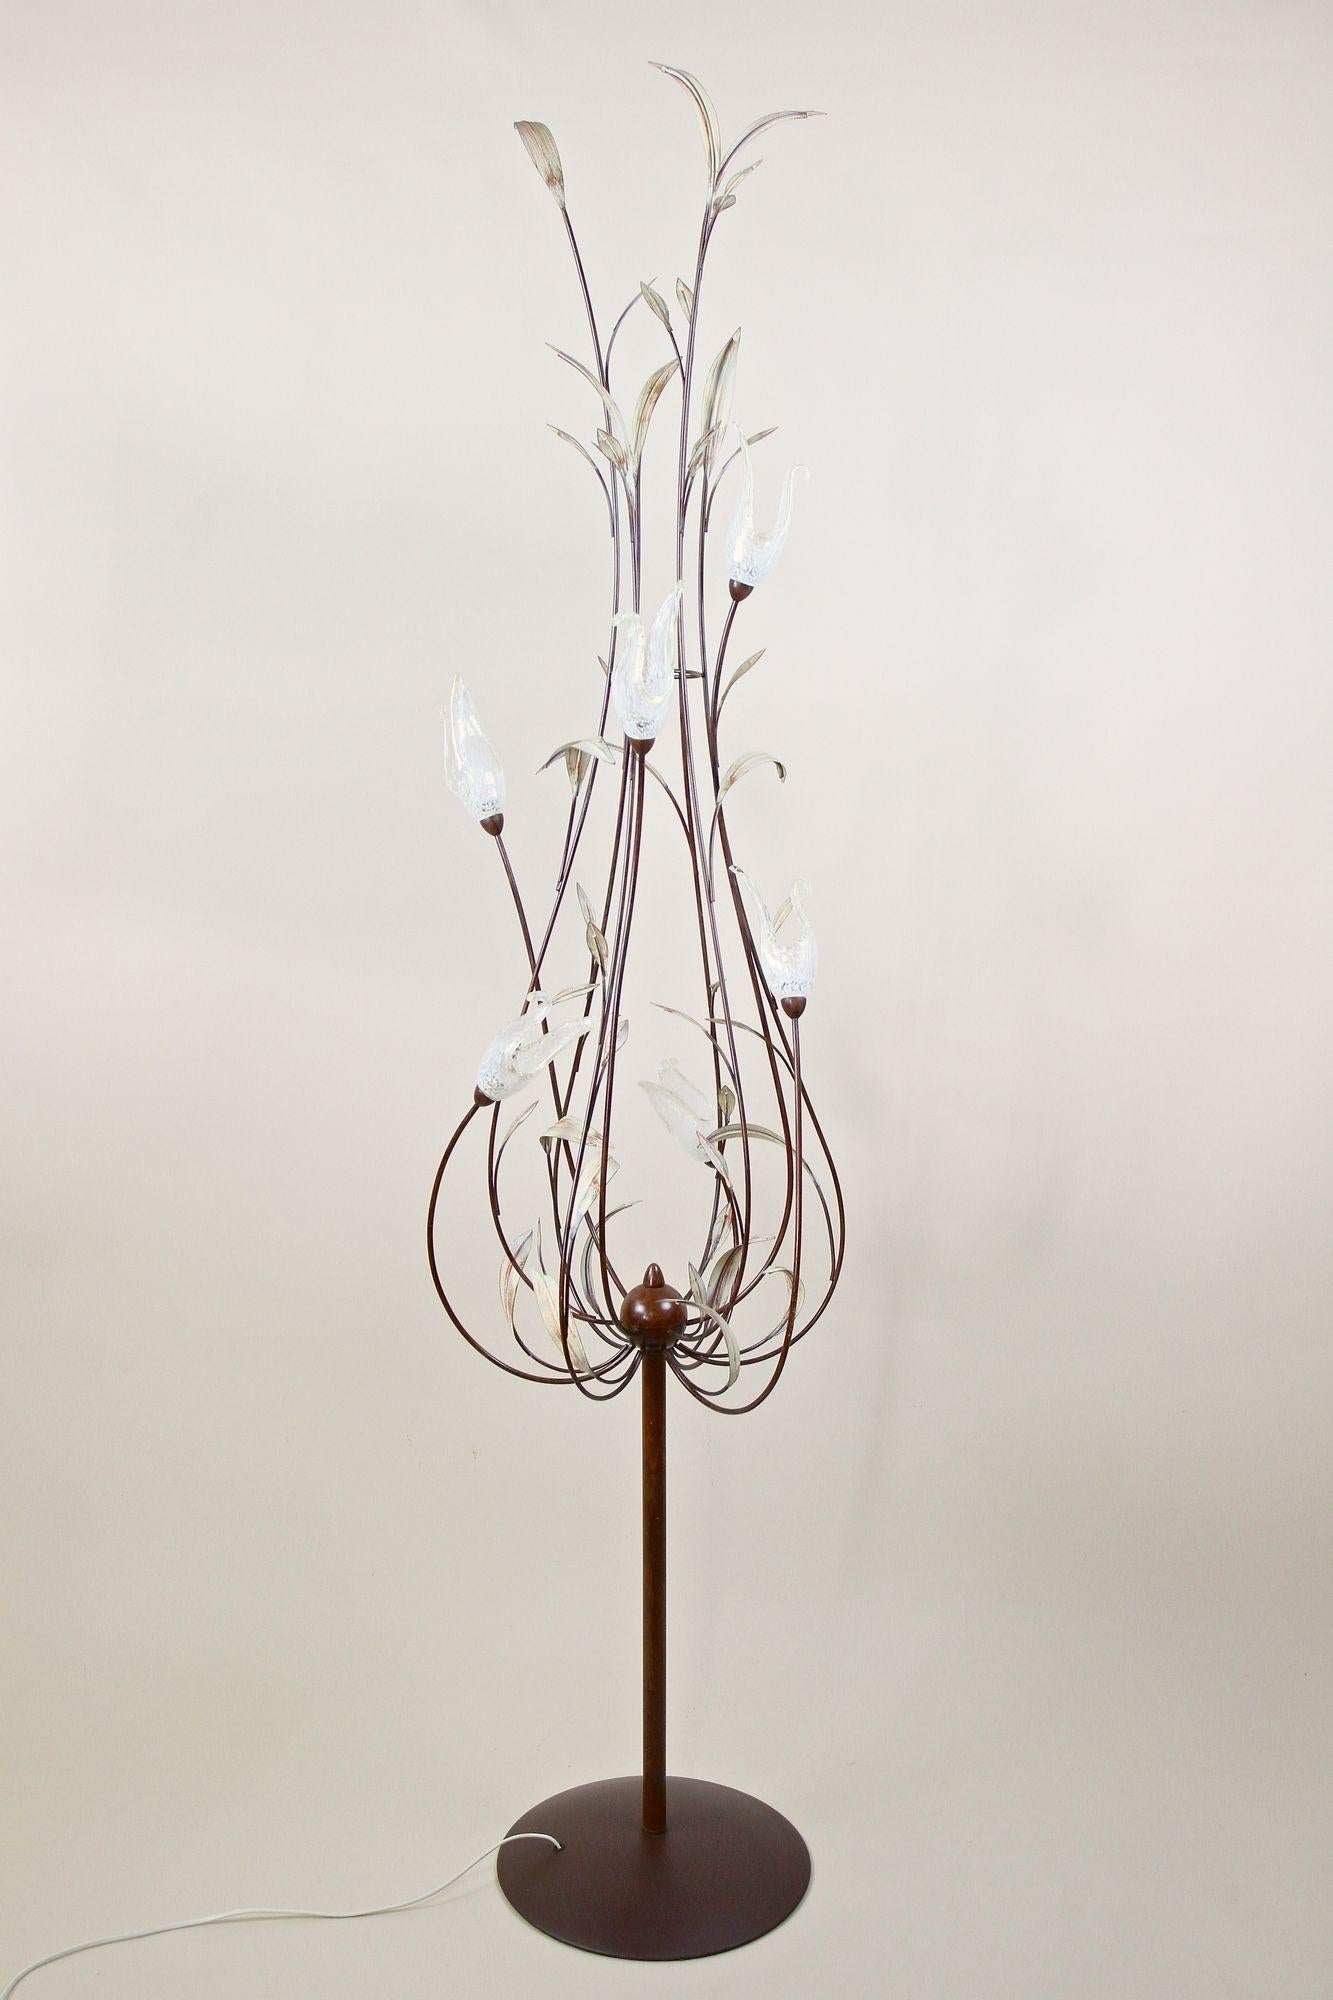 Magical midcentury Murano floor lamp from the period around 1970 in Italy. An extraordinary, absolutely fantastic shaped large metal floor lamp showing beautiful hand painted reed leaves. The highlight are the six stylized Murano glass swans which